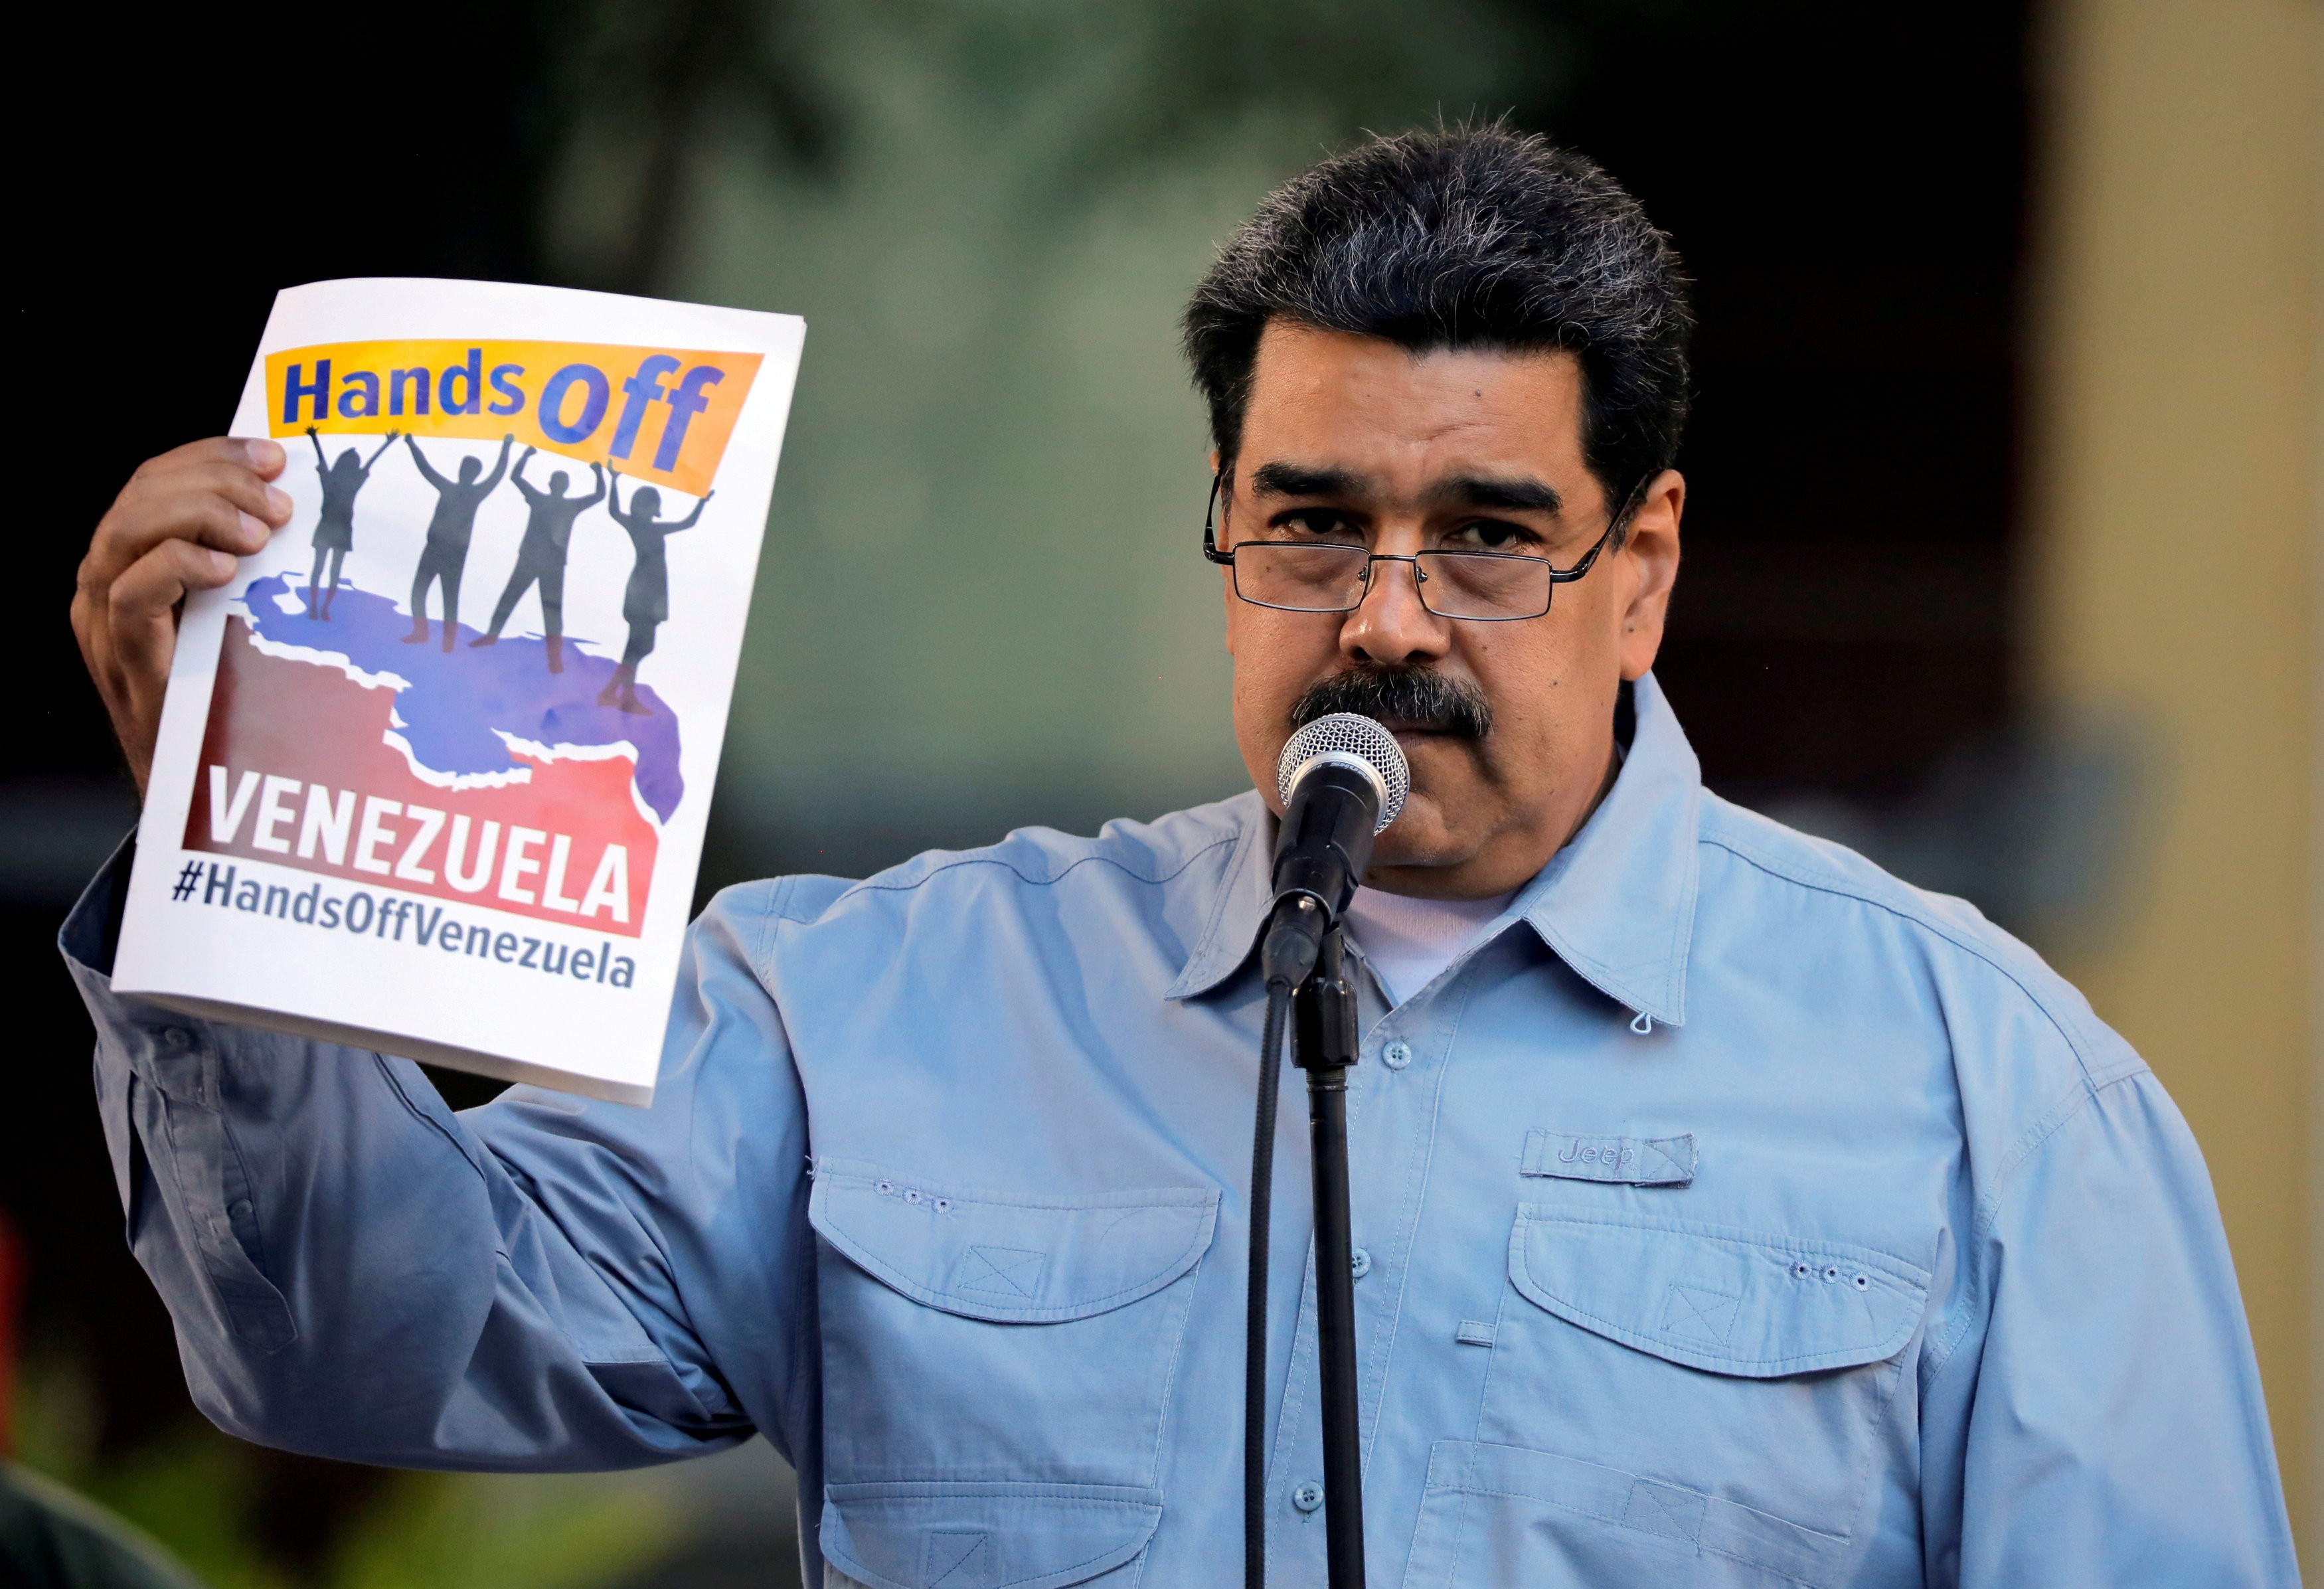 Beijing says Nicolas Maduro’s place as Venezuela’s president is a matter for its people. Photo: Reuters